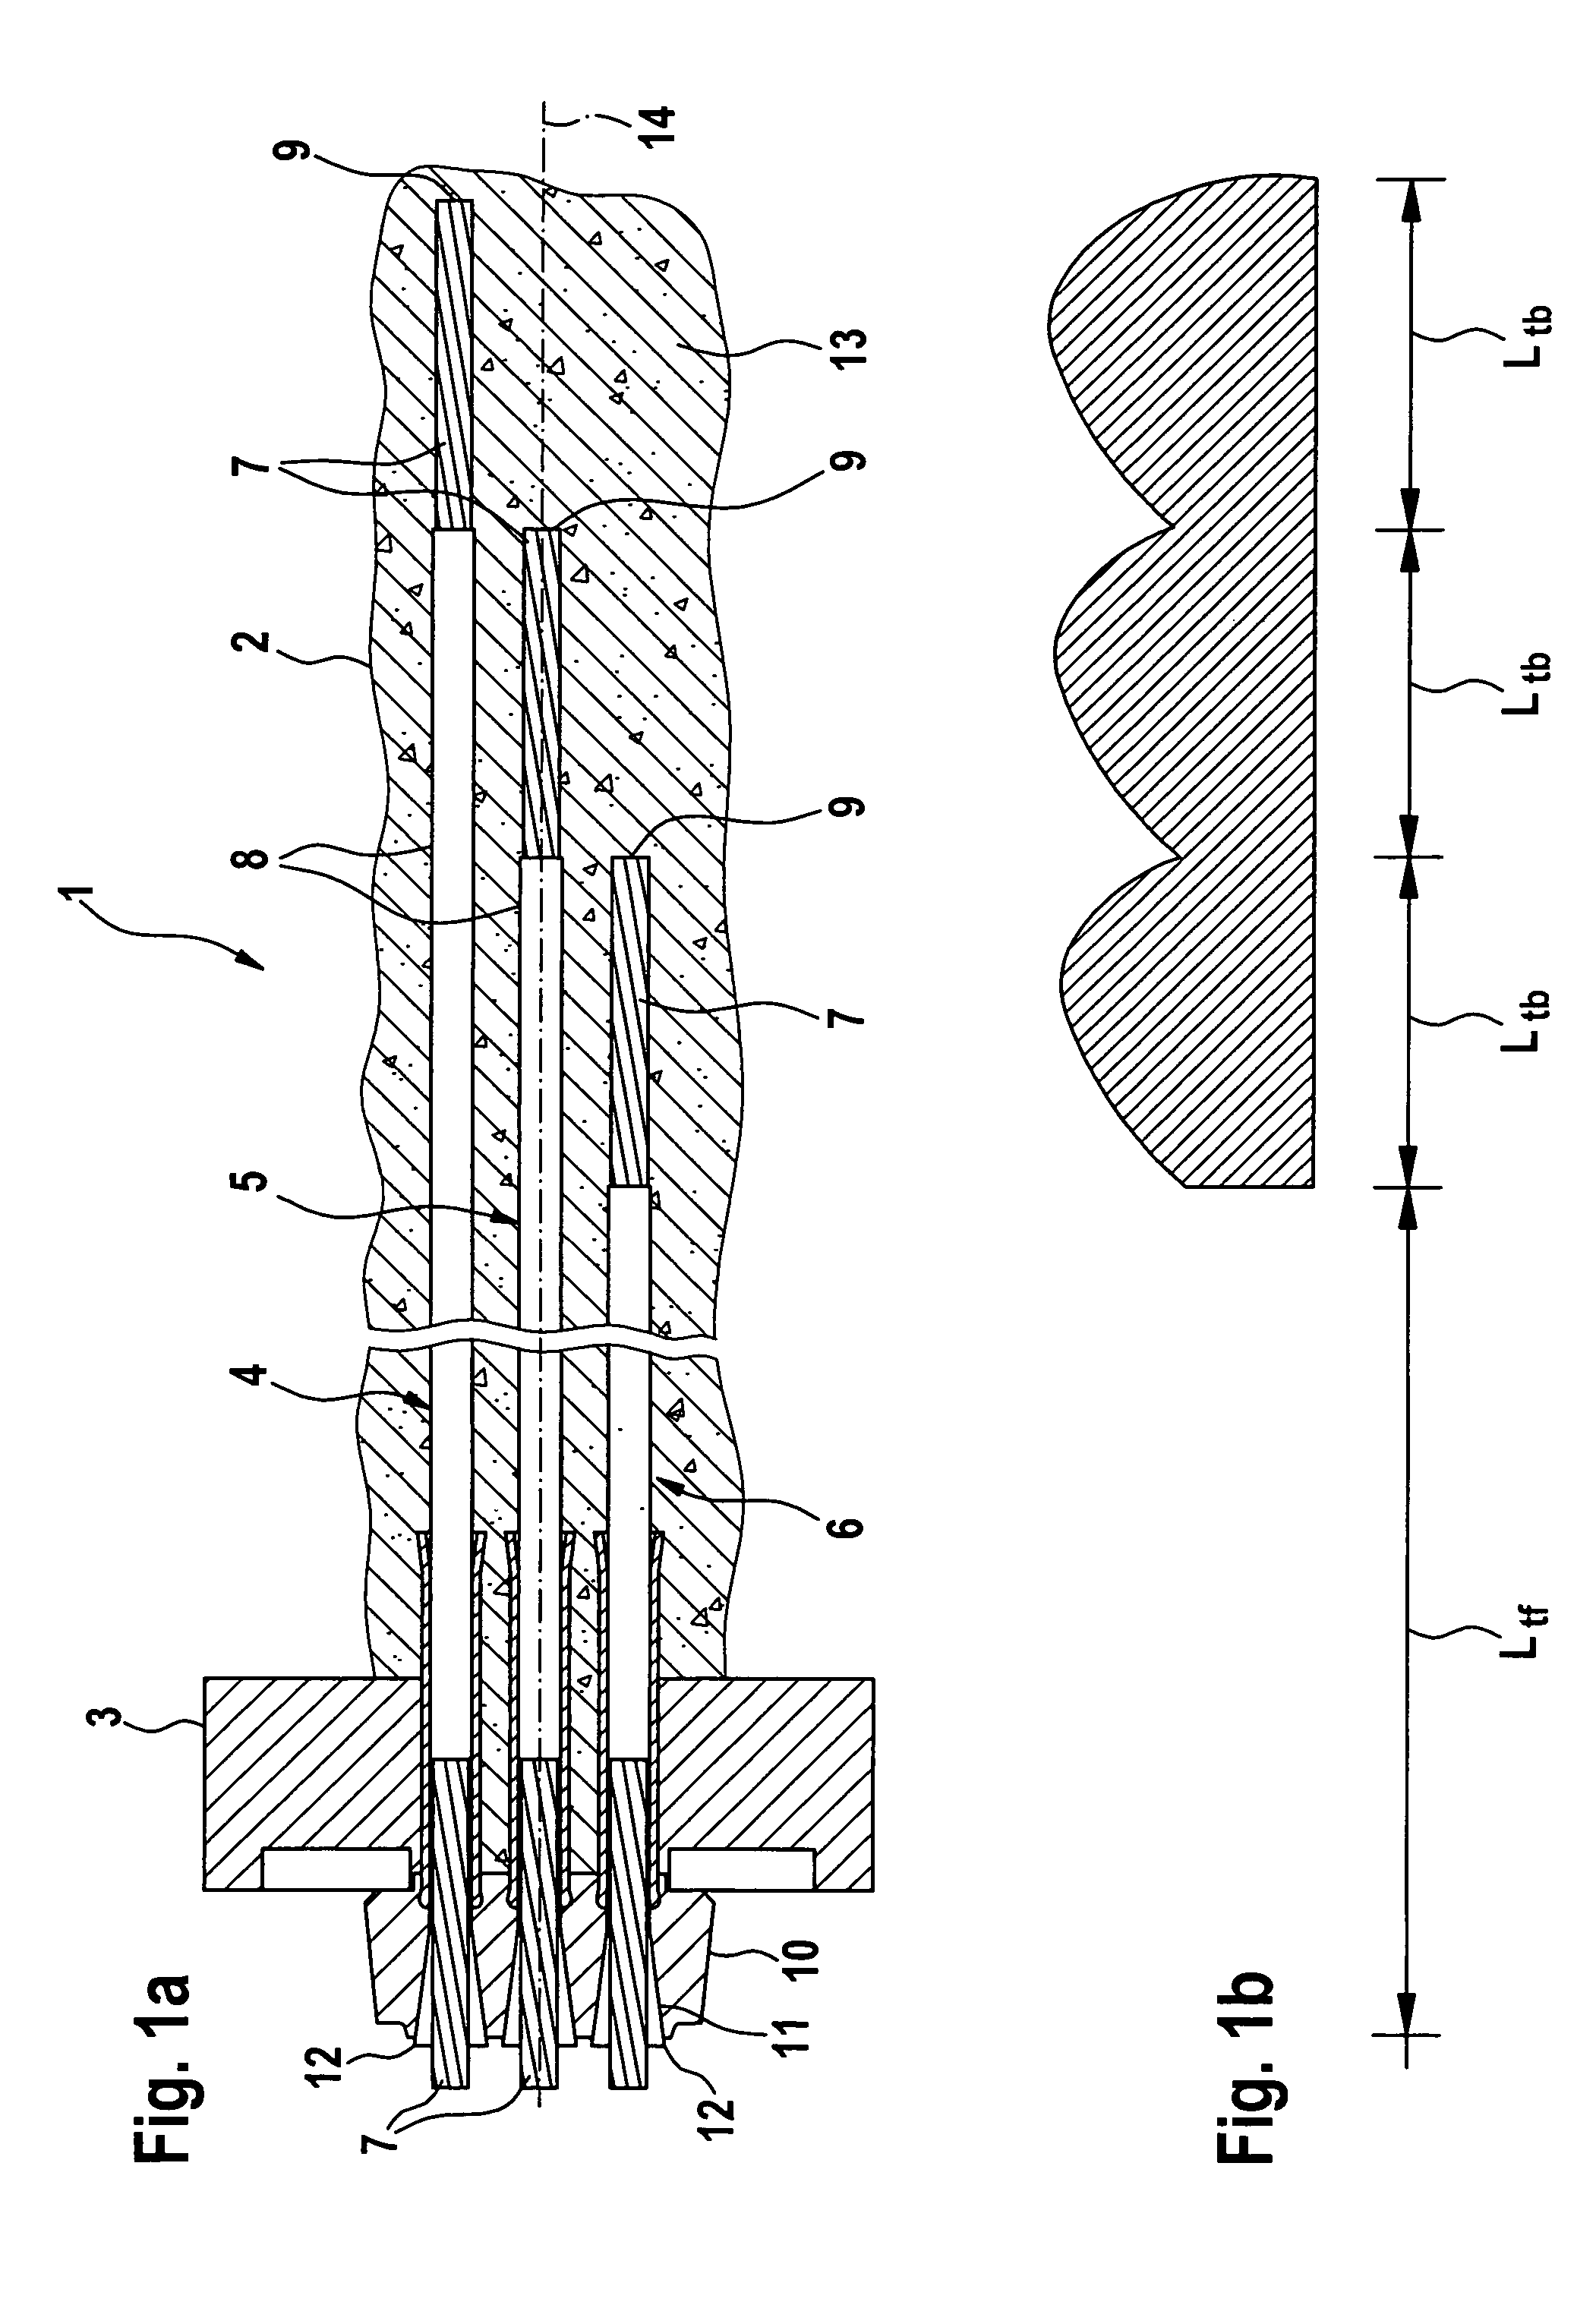 Method and arrangement for stressing a staggered anchorage